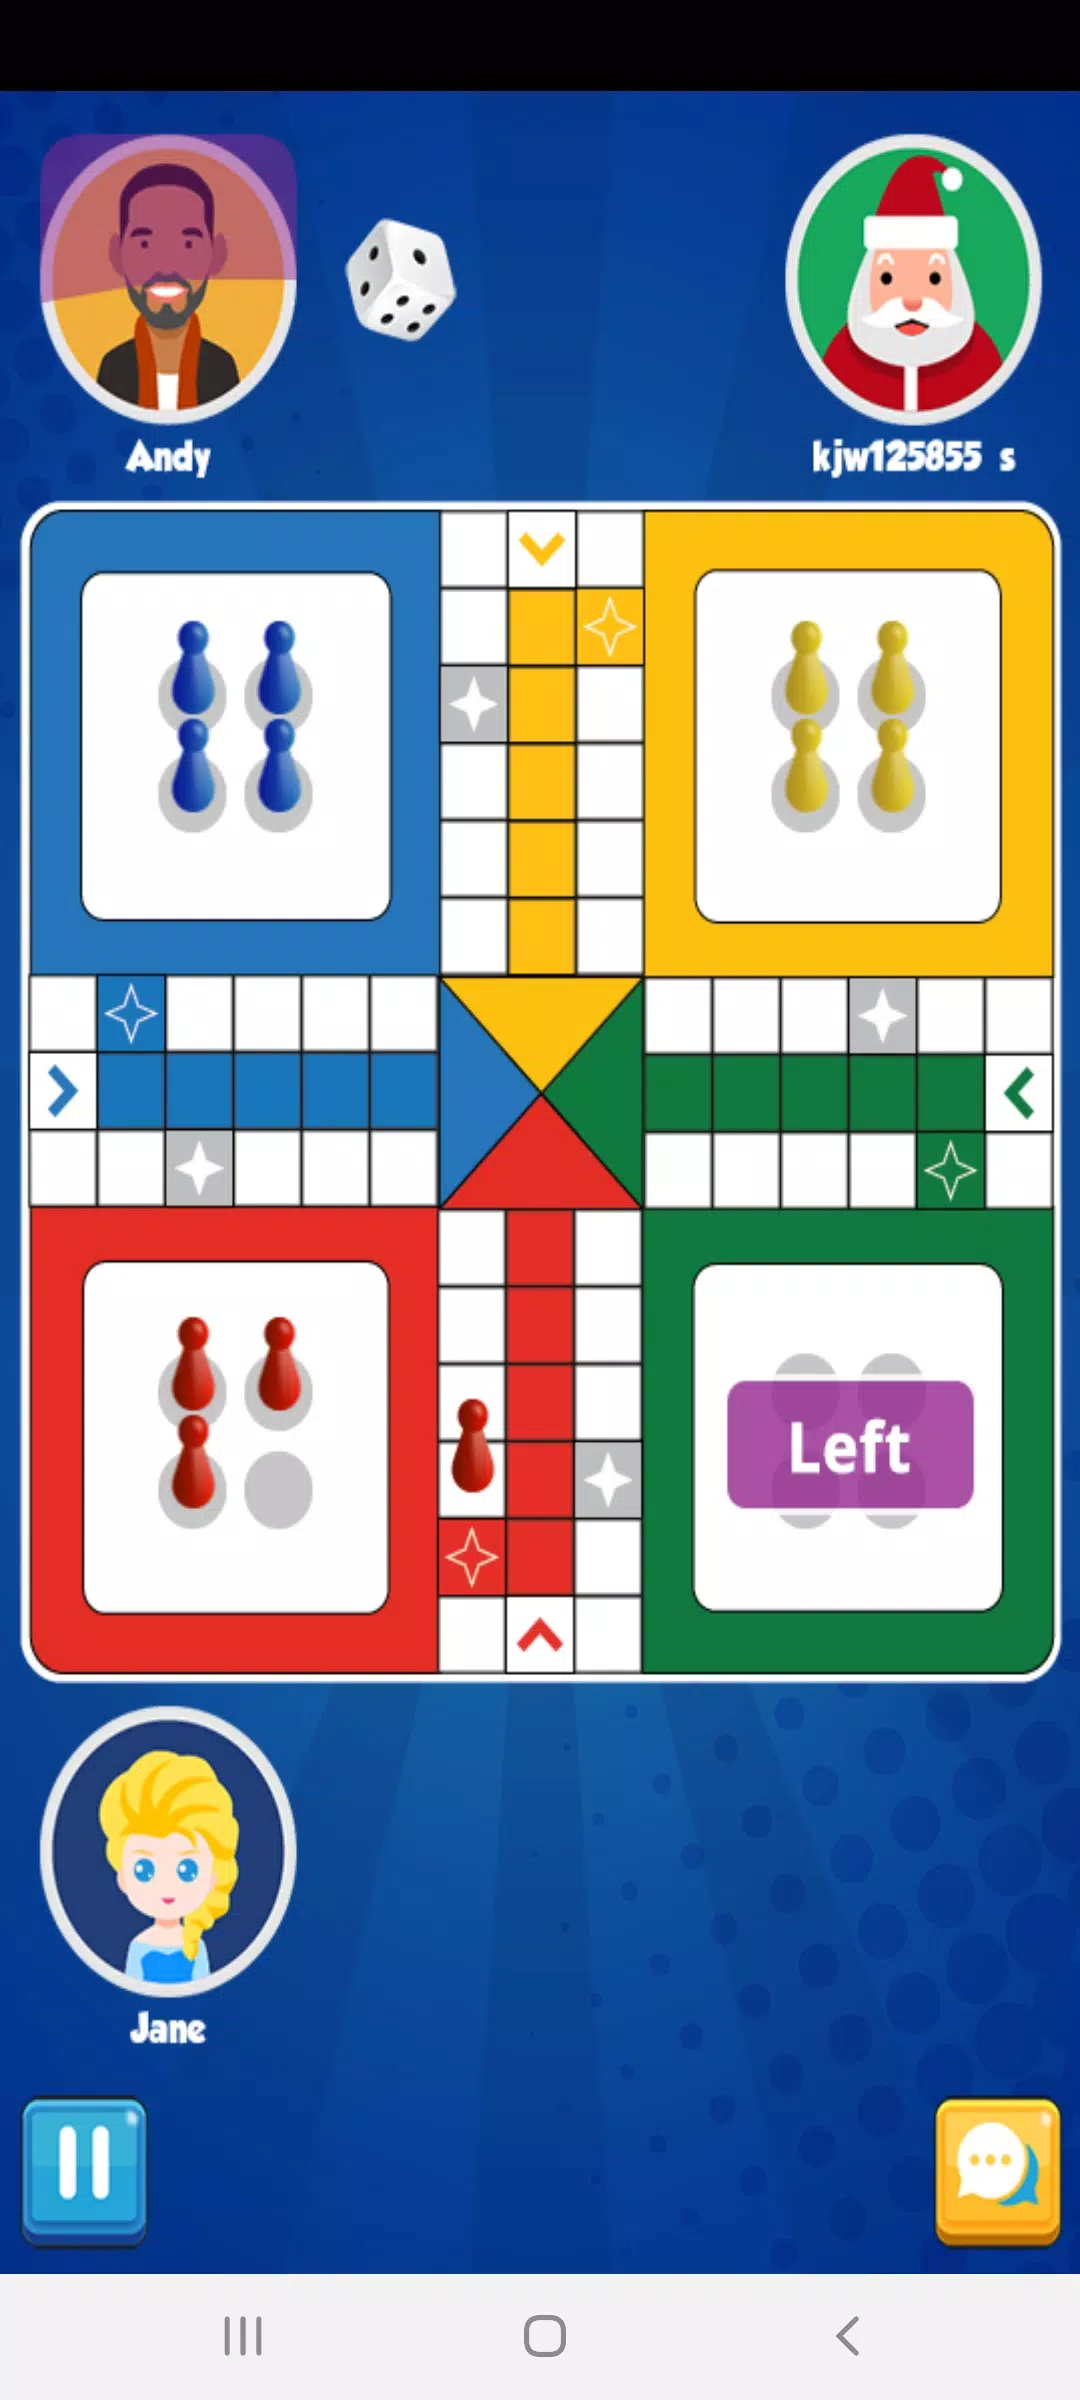 Ludo Hero Party : Online Game Apk Download for Android- Latest